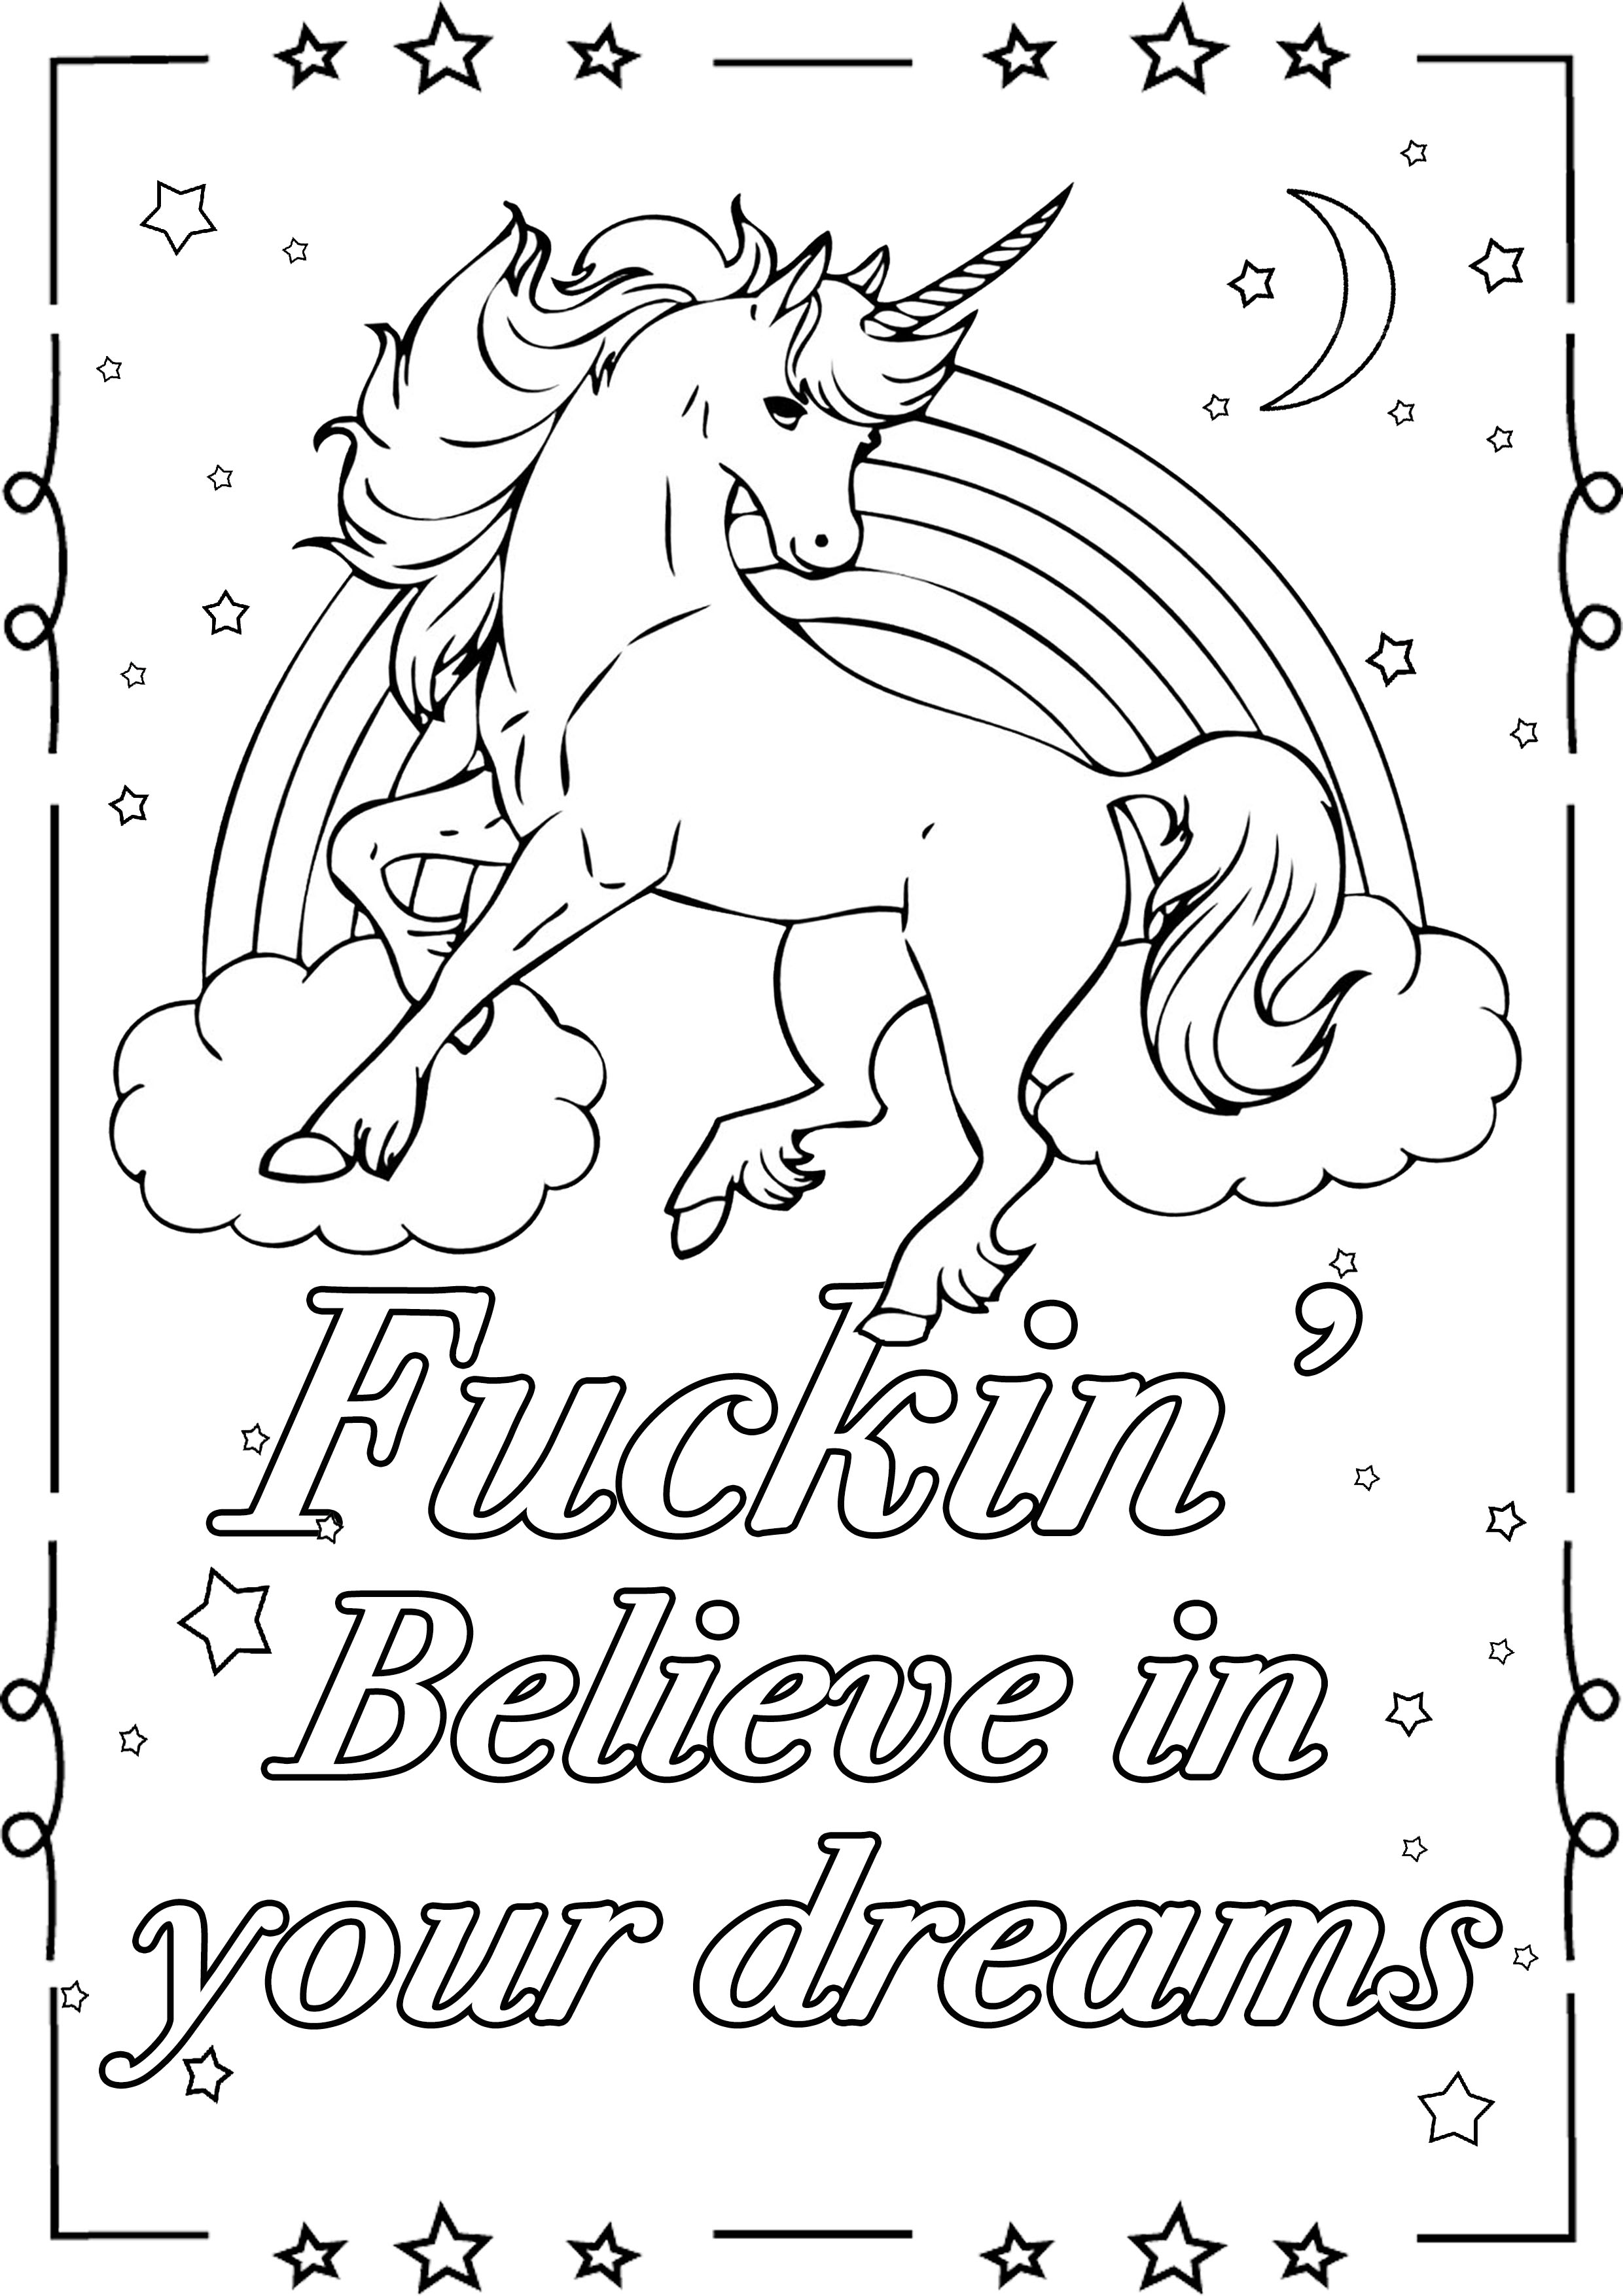 Fuckin' believe in your dreams : Swear word coloring page with unicorn